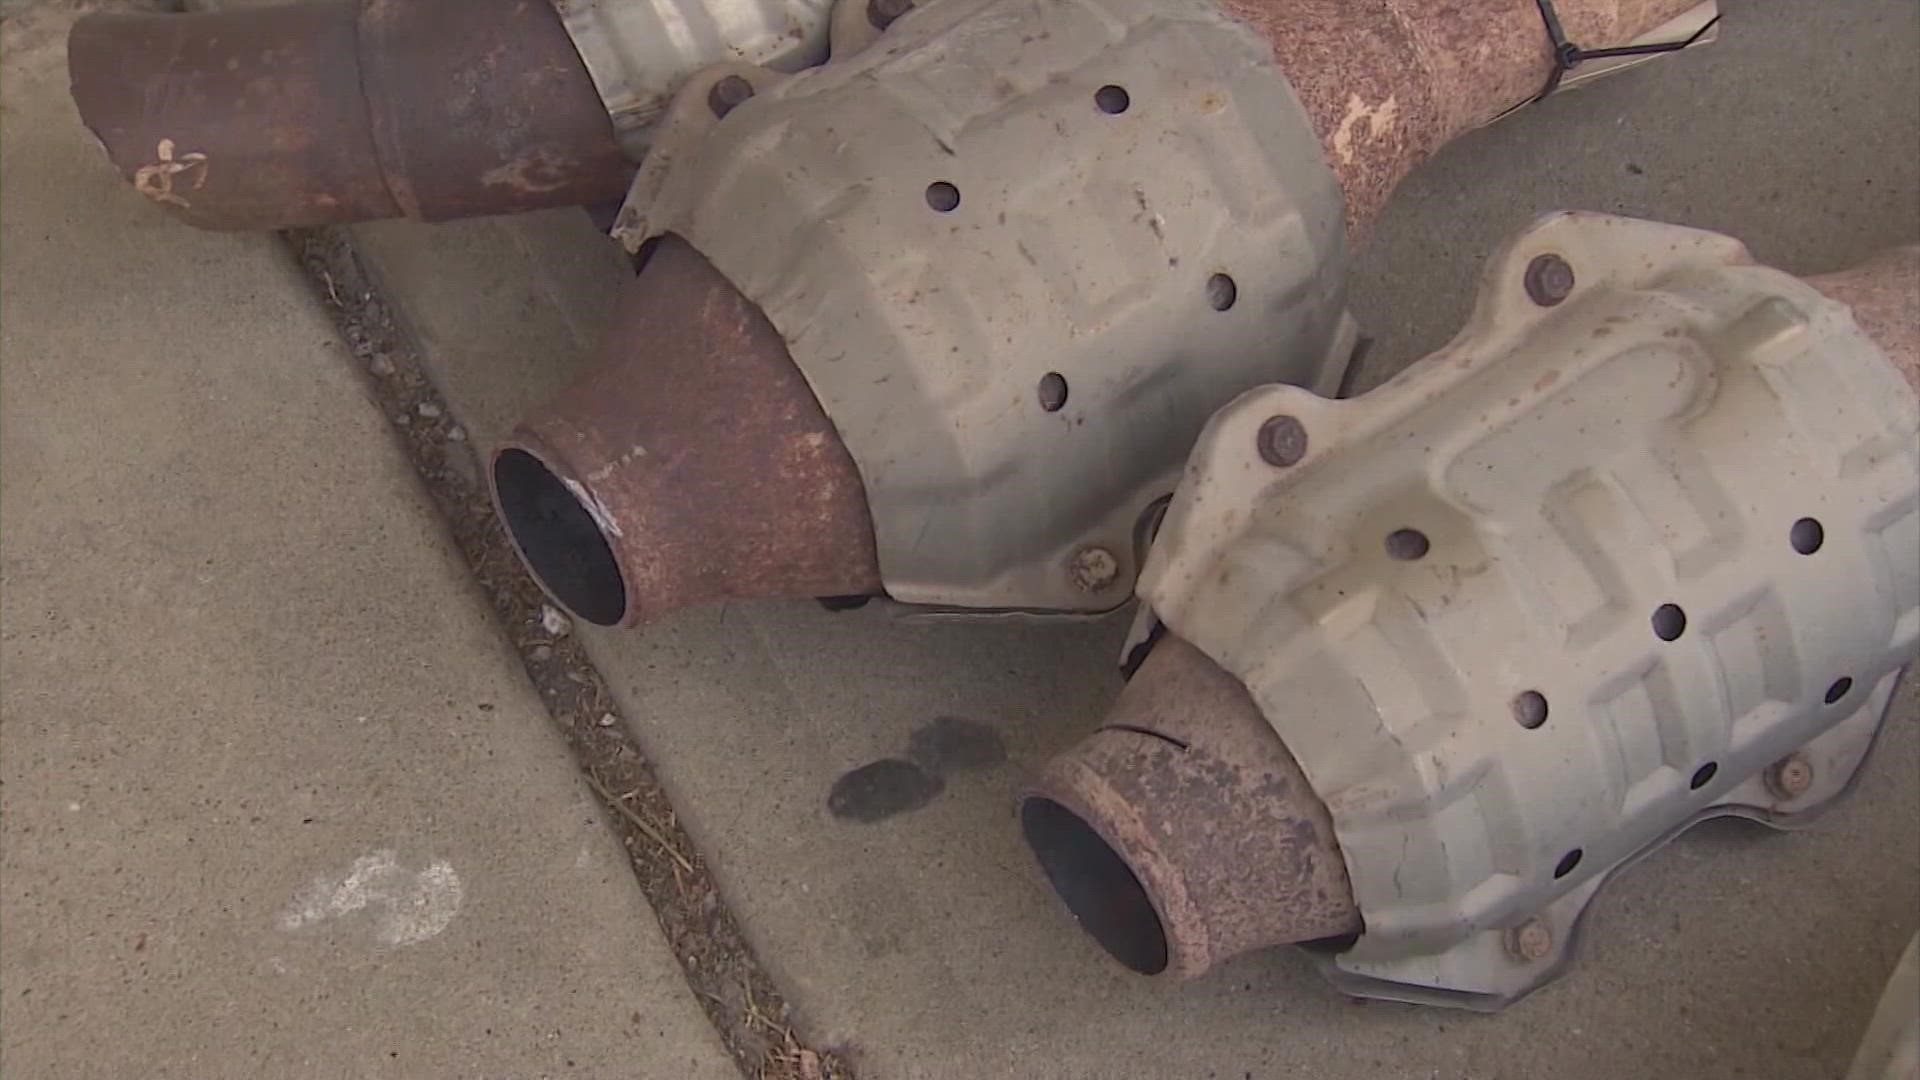 City leaders voted to ban selling or possessing a catalytic converter that's been cut from a vehicle without documentation.